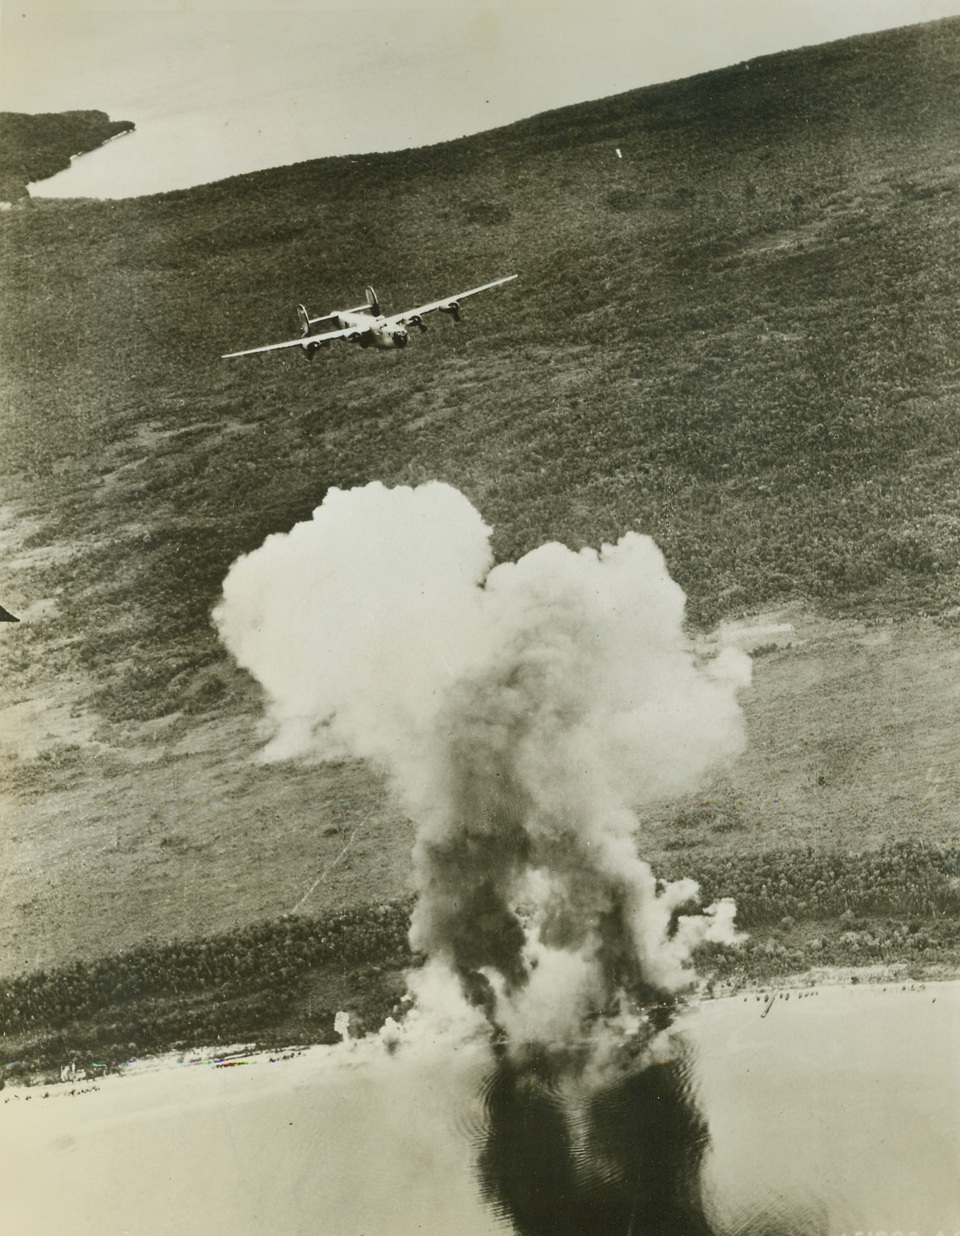 Bullseye on Jap Supply Dump, 6/29/1944. A Jap supply and personnel area goes up in a column of smoke on Biak Island, as Liberator Bombers of the U.S. 13th Air Force lay down a pattern of bombs on the narrow beach that is the target. Dark column of smoke causing the deep shadow on calm sea indicates hits on a fuel dump. Credit: USAAF photo from ACME;